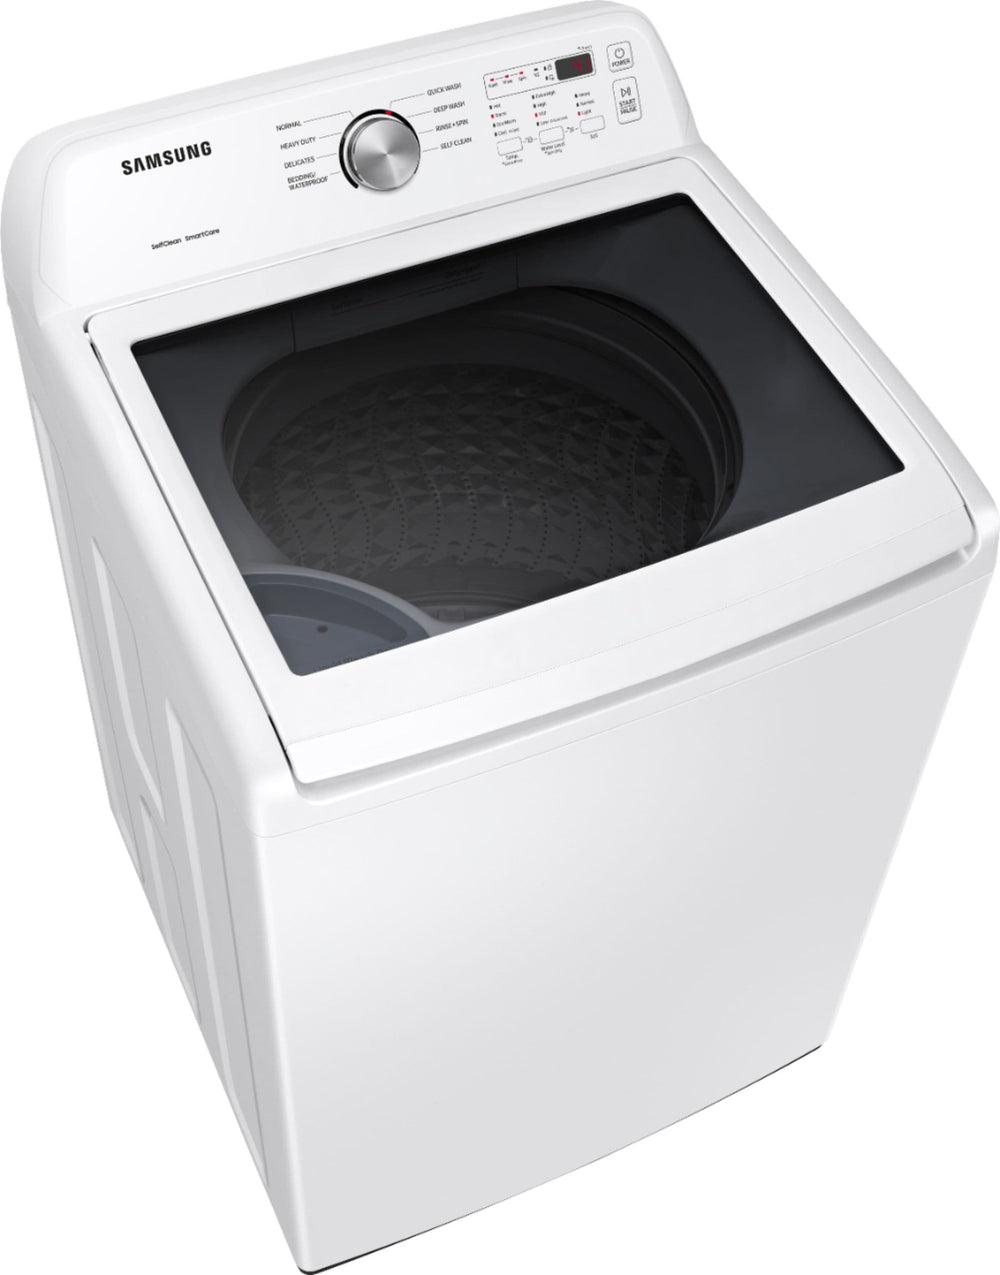 Samsung - 4.5 Cu. Ft. High Efficiency Top Load Washer with Vibration Reduction Technology+ - White_1